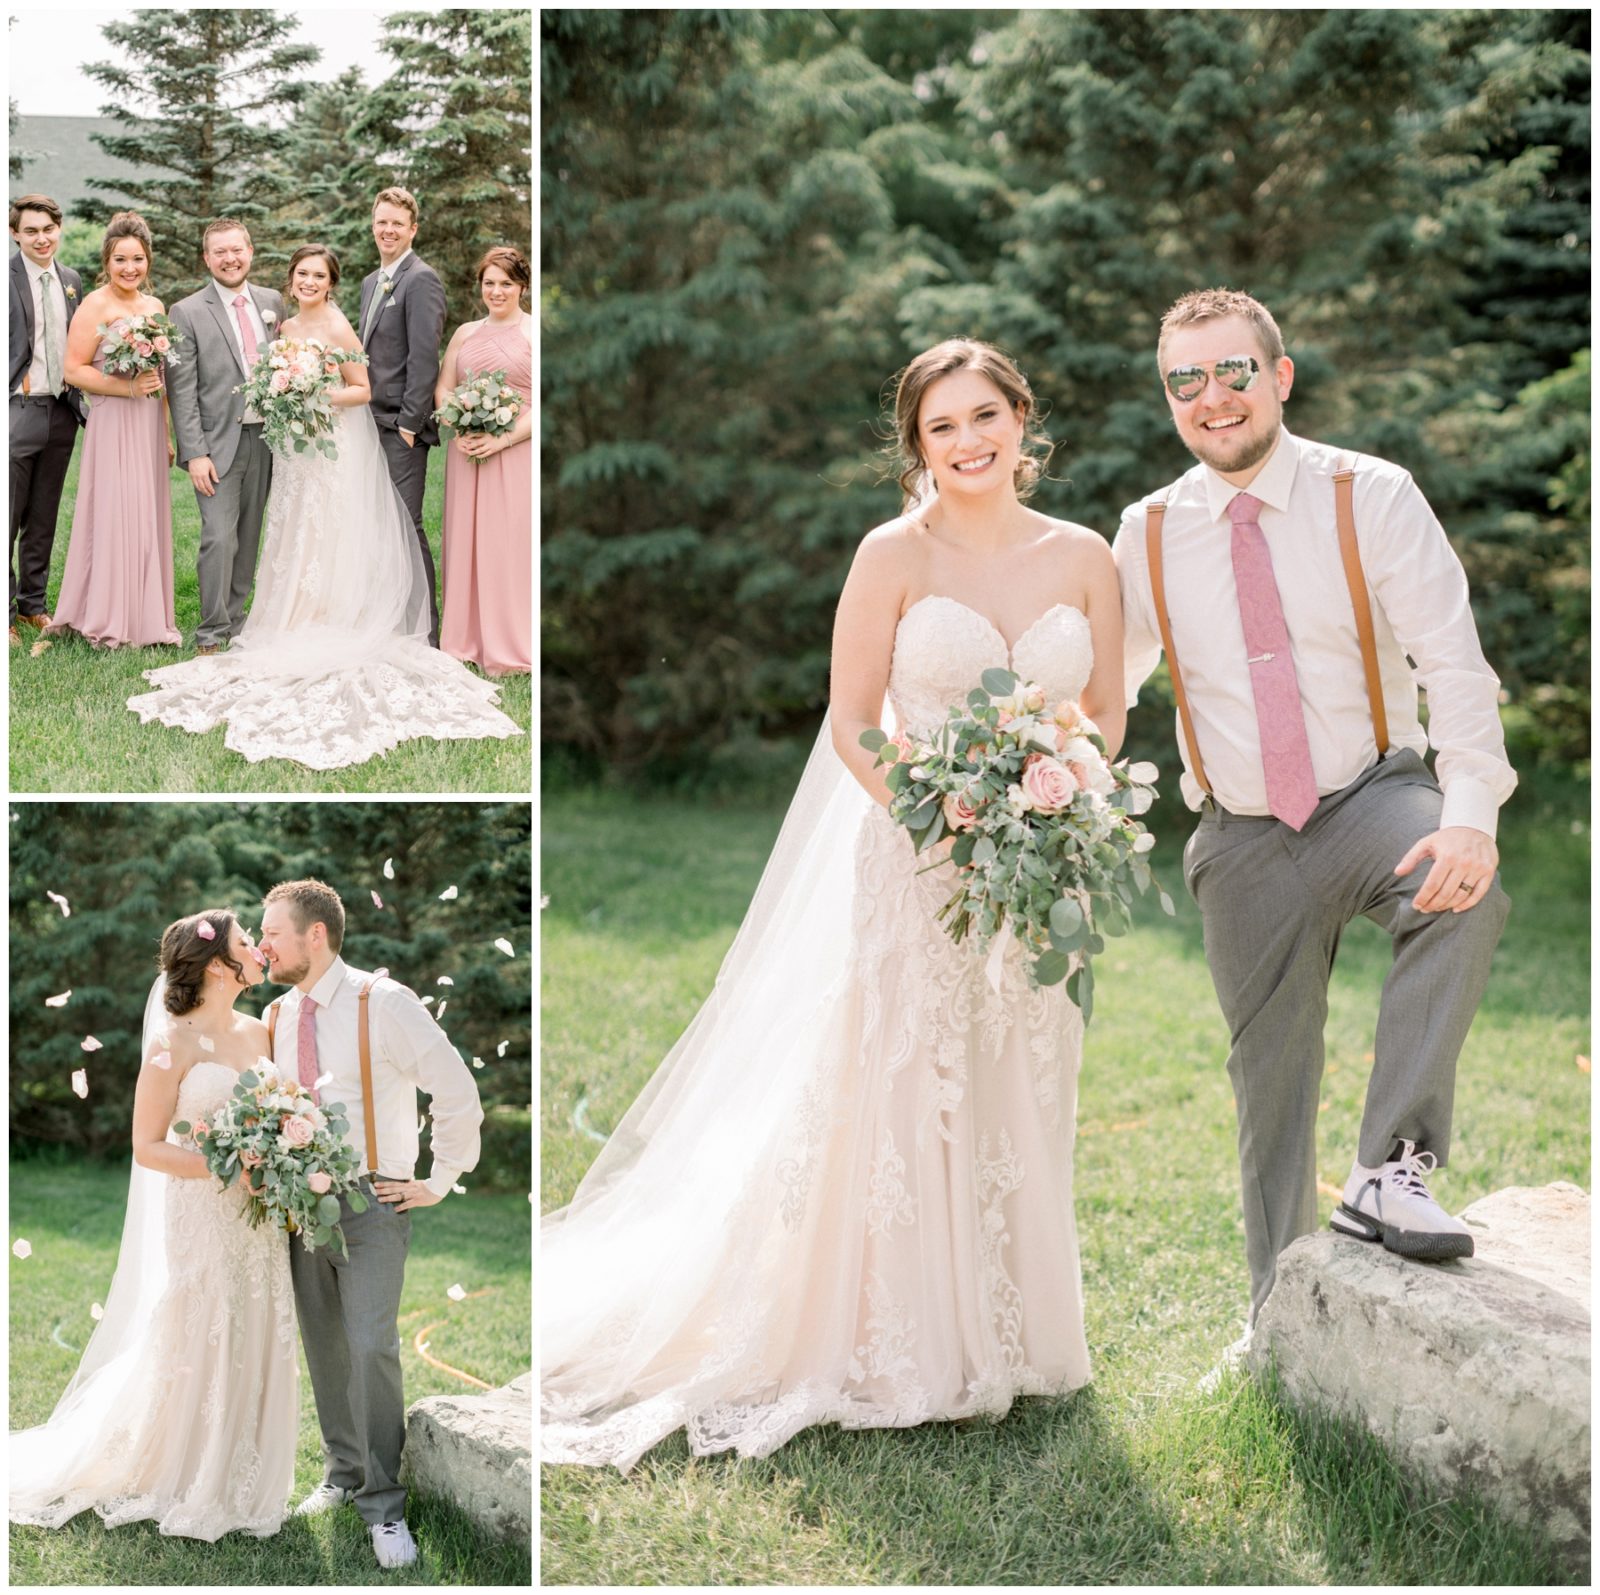 Compilation of photos of the bride and groom with some of their loved ones.